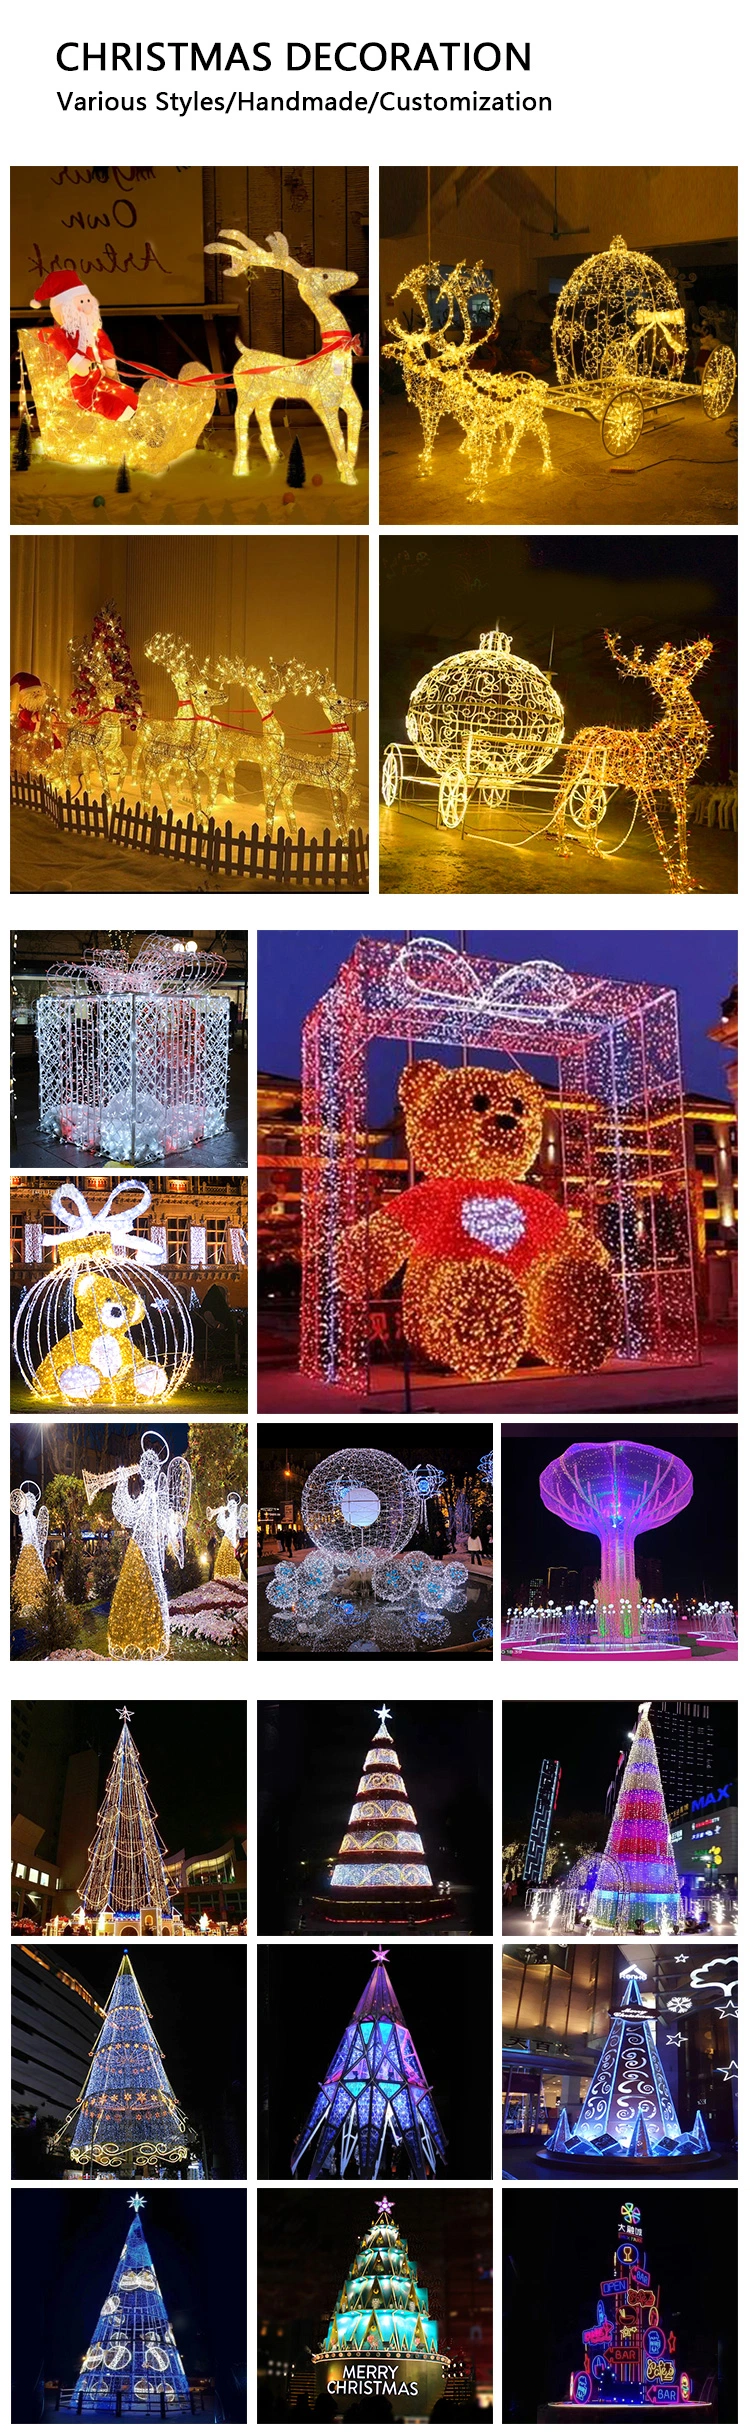 LED Motif Bear Lights Christmas Holiday Decorations Outdoor Warm White Waterproof Giant Decorative Landscaping